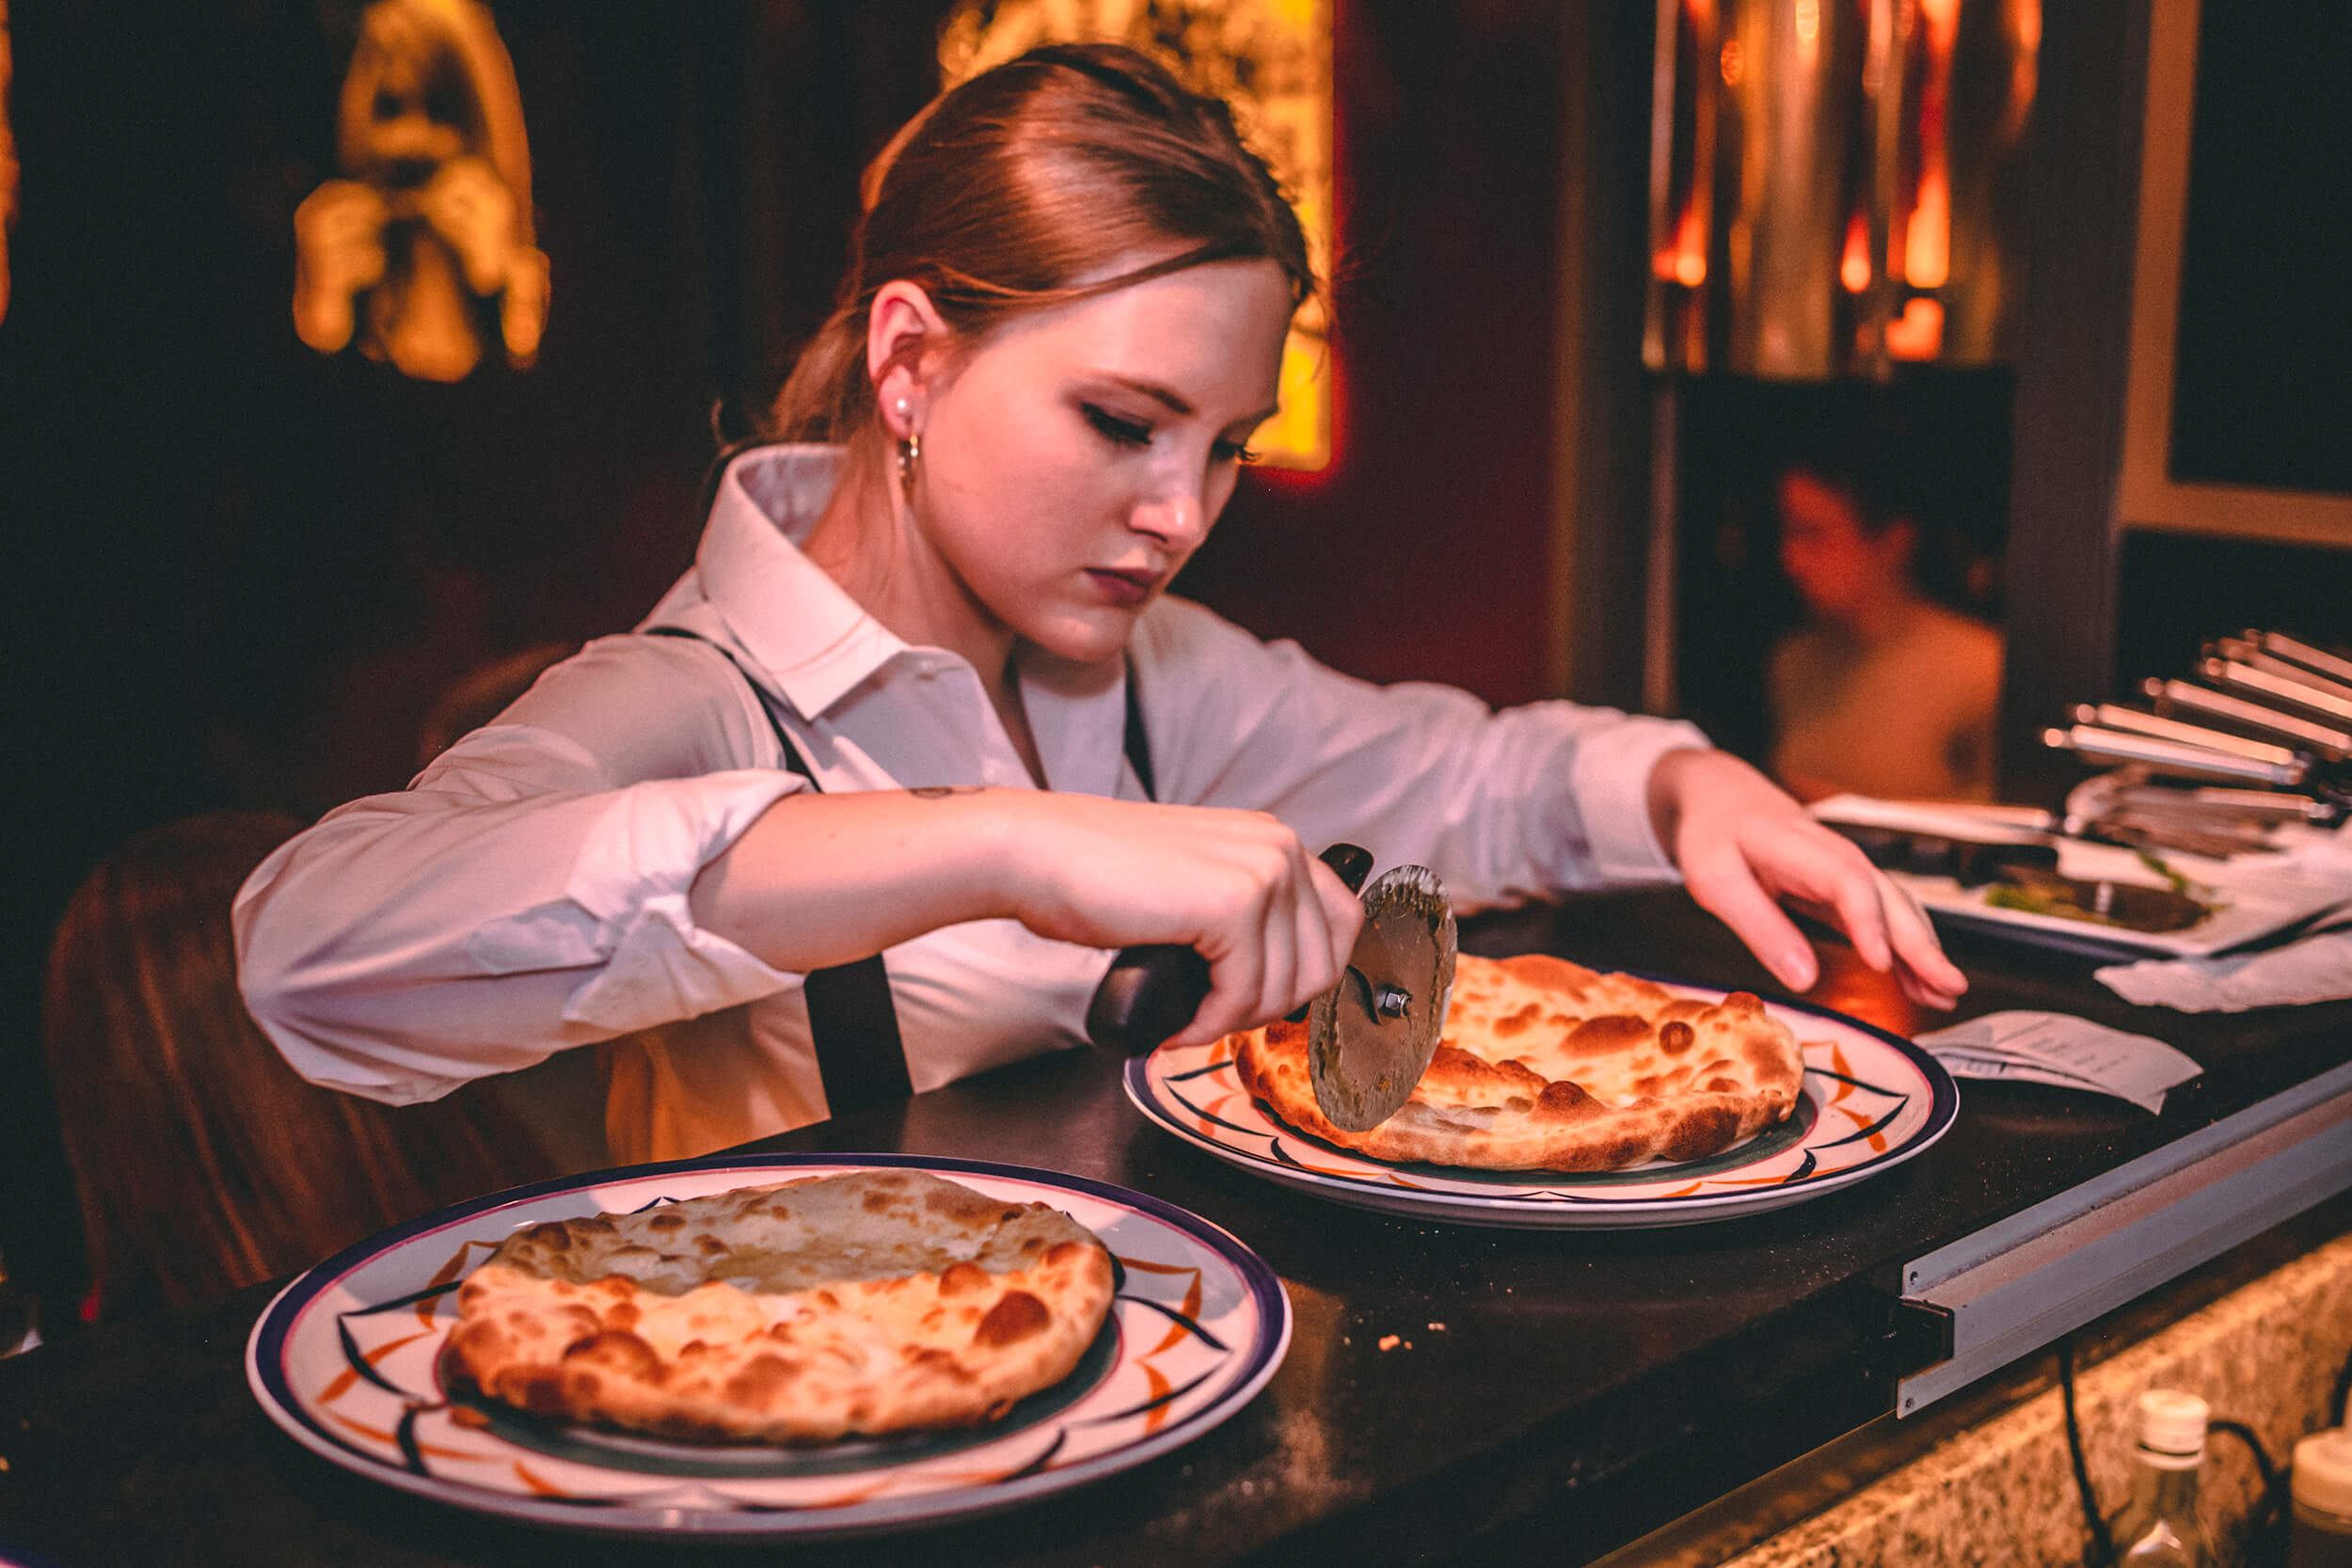 Waitress cutting pizza ready to be served.